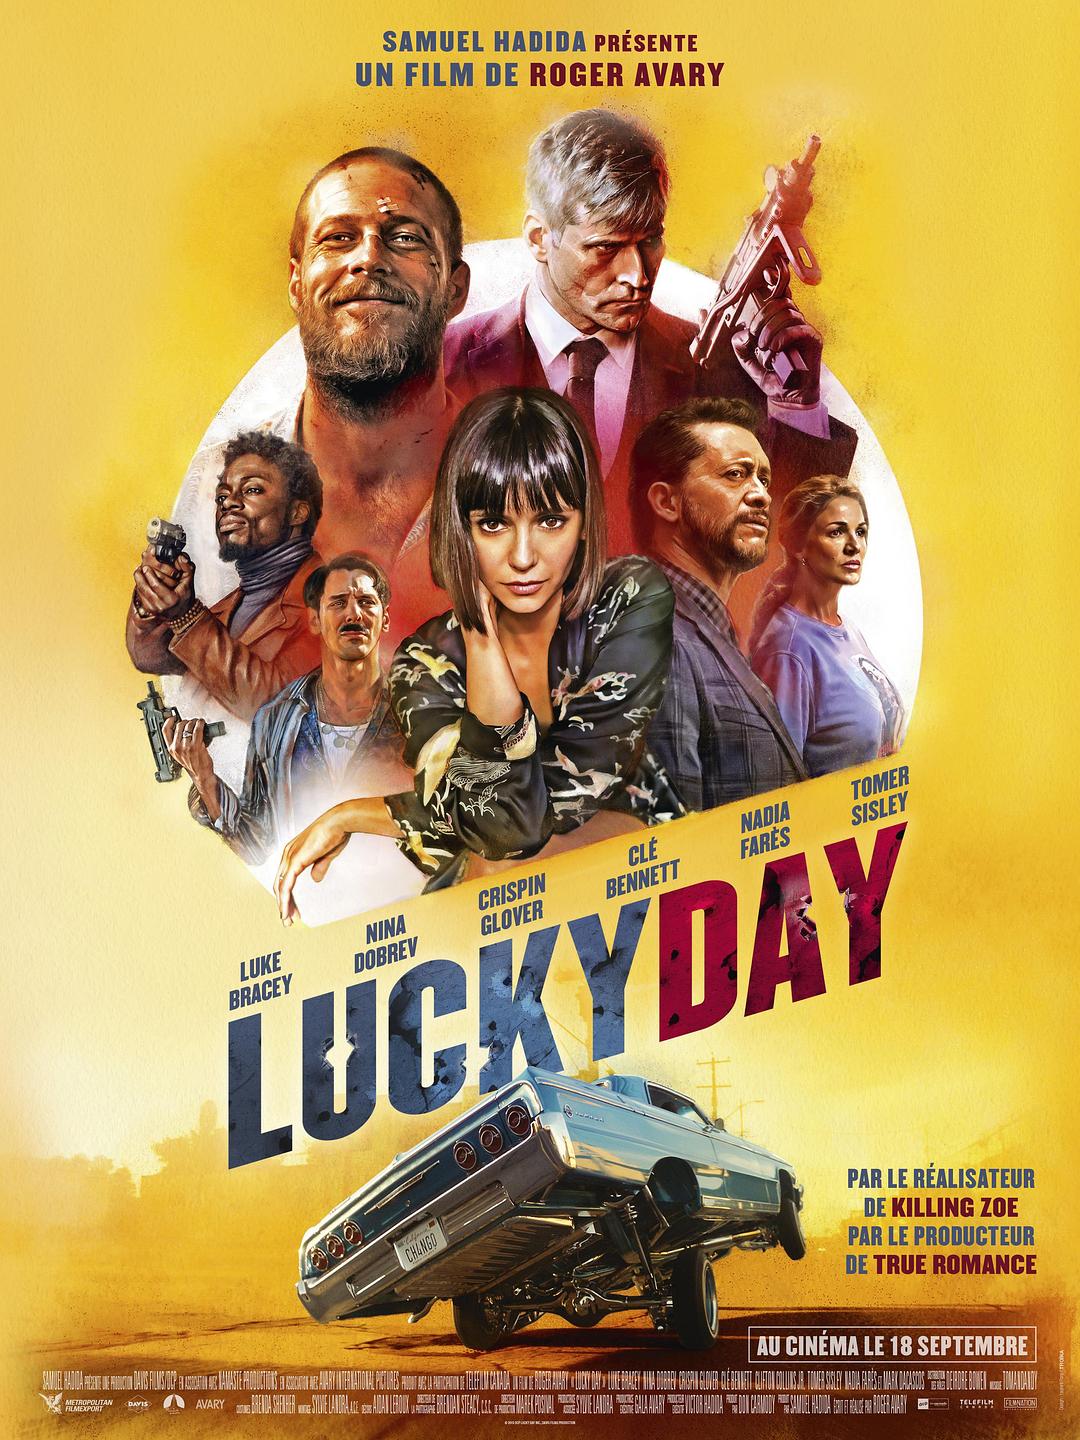  Lucky.Day.2019.1080p.BluRay.REMUX.AVC.DTS-HD.MA.5.1-FGT 19.06GB-1.png